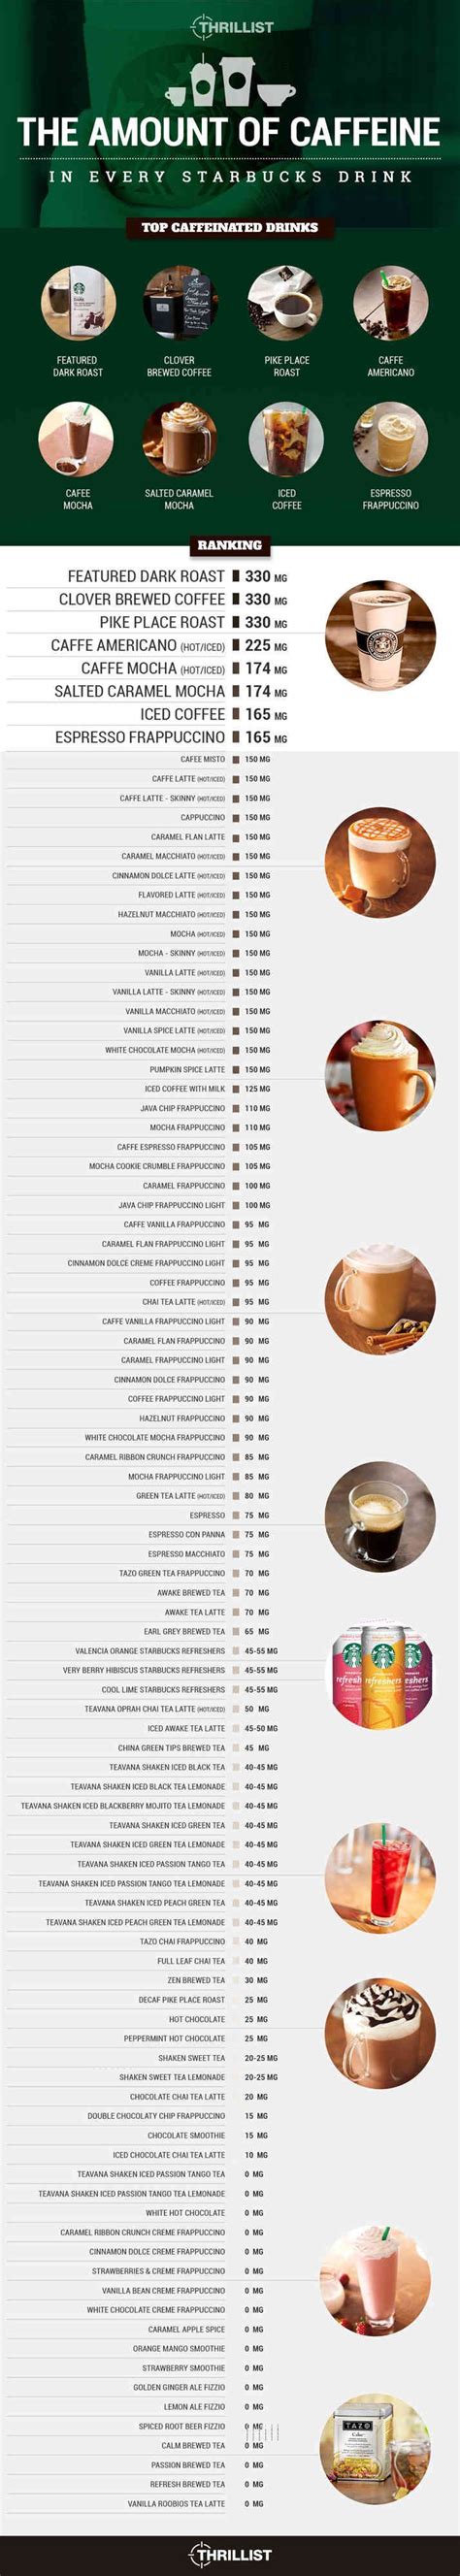 Typically, i grab one when i am thirsty and wanting starbucks cold brew coffee has different caffeine levels from the rest of the iced coffees: The Amount of Caffeine in Every Drink on Starbucks's Menu ...